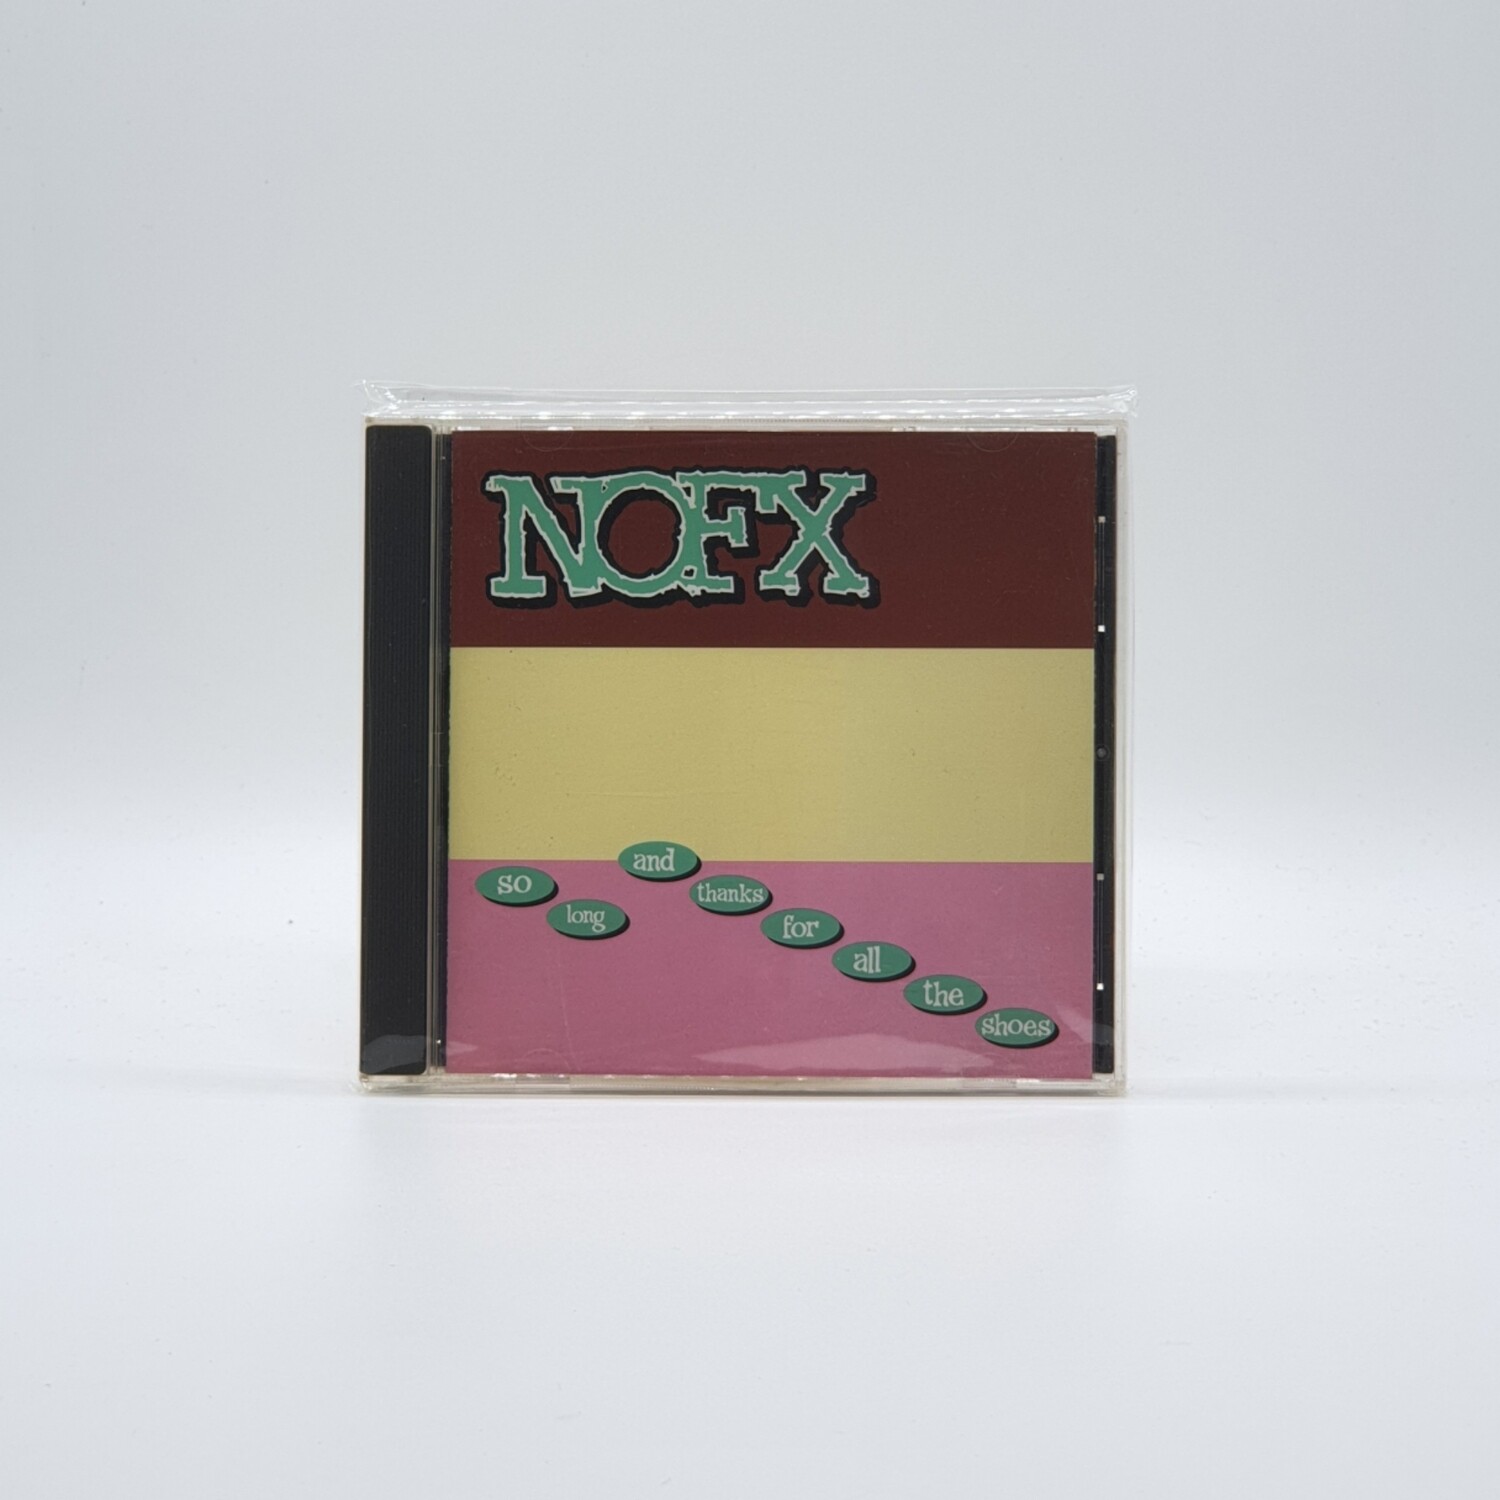 [USED] NOFX -SO LONG AND THANKS FOR ALL THE SHOES- CD